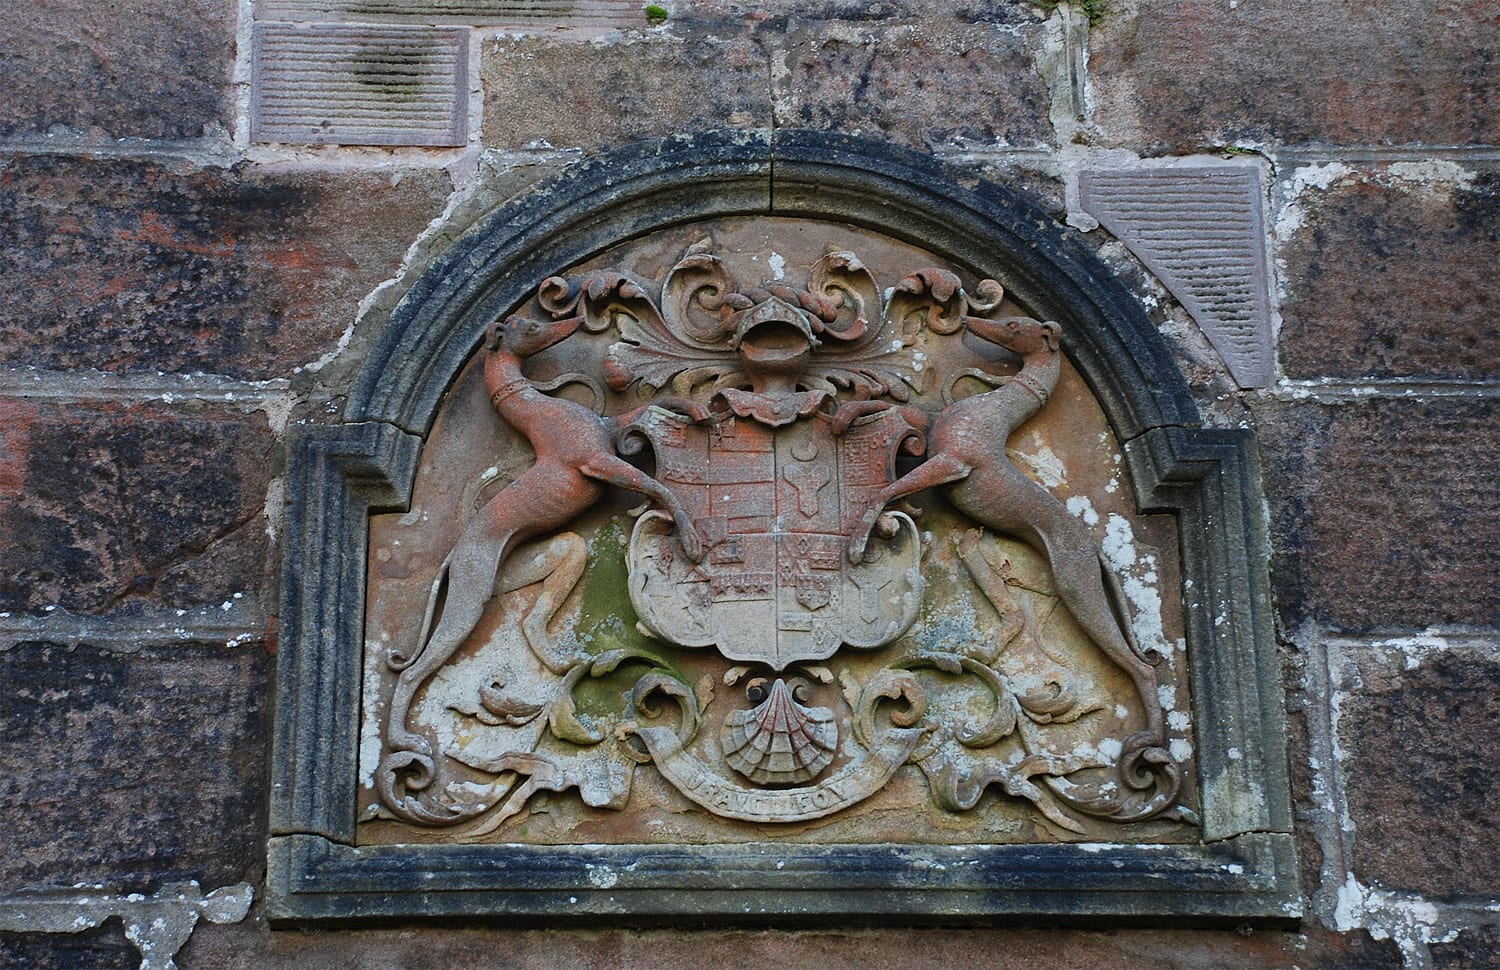 The Boswell Coat of Arms